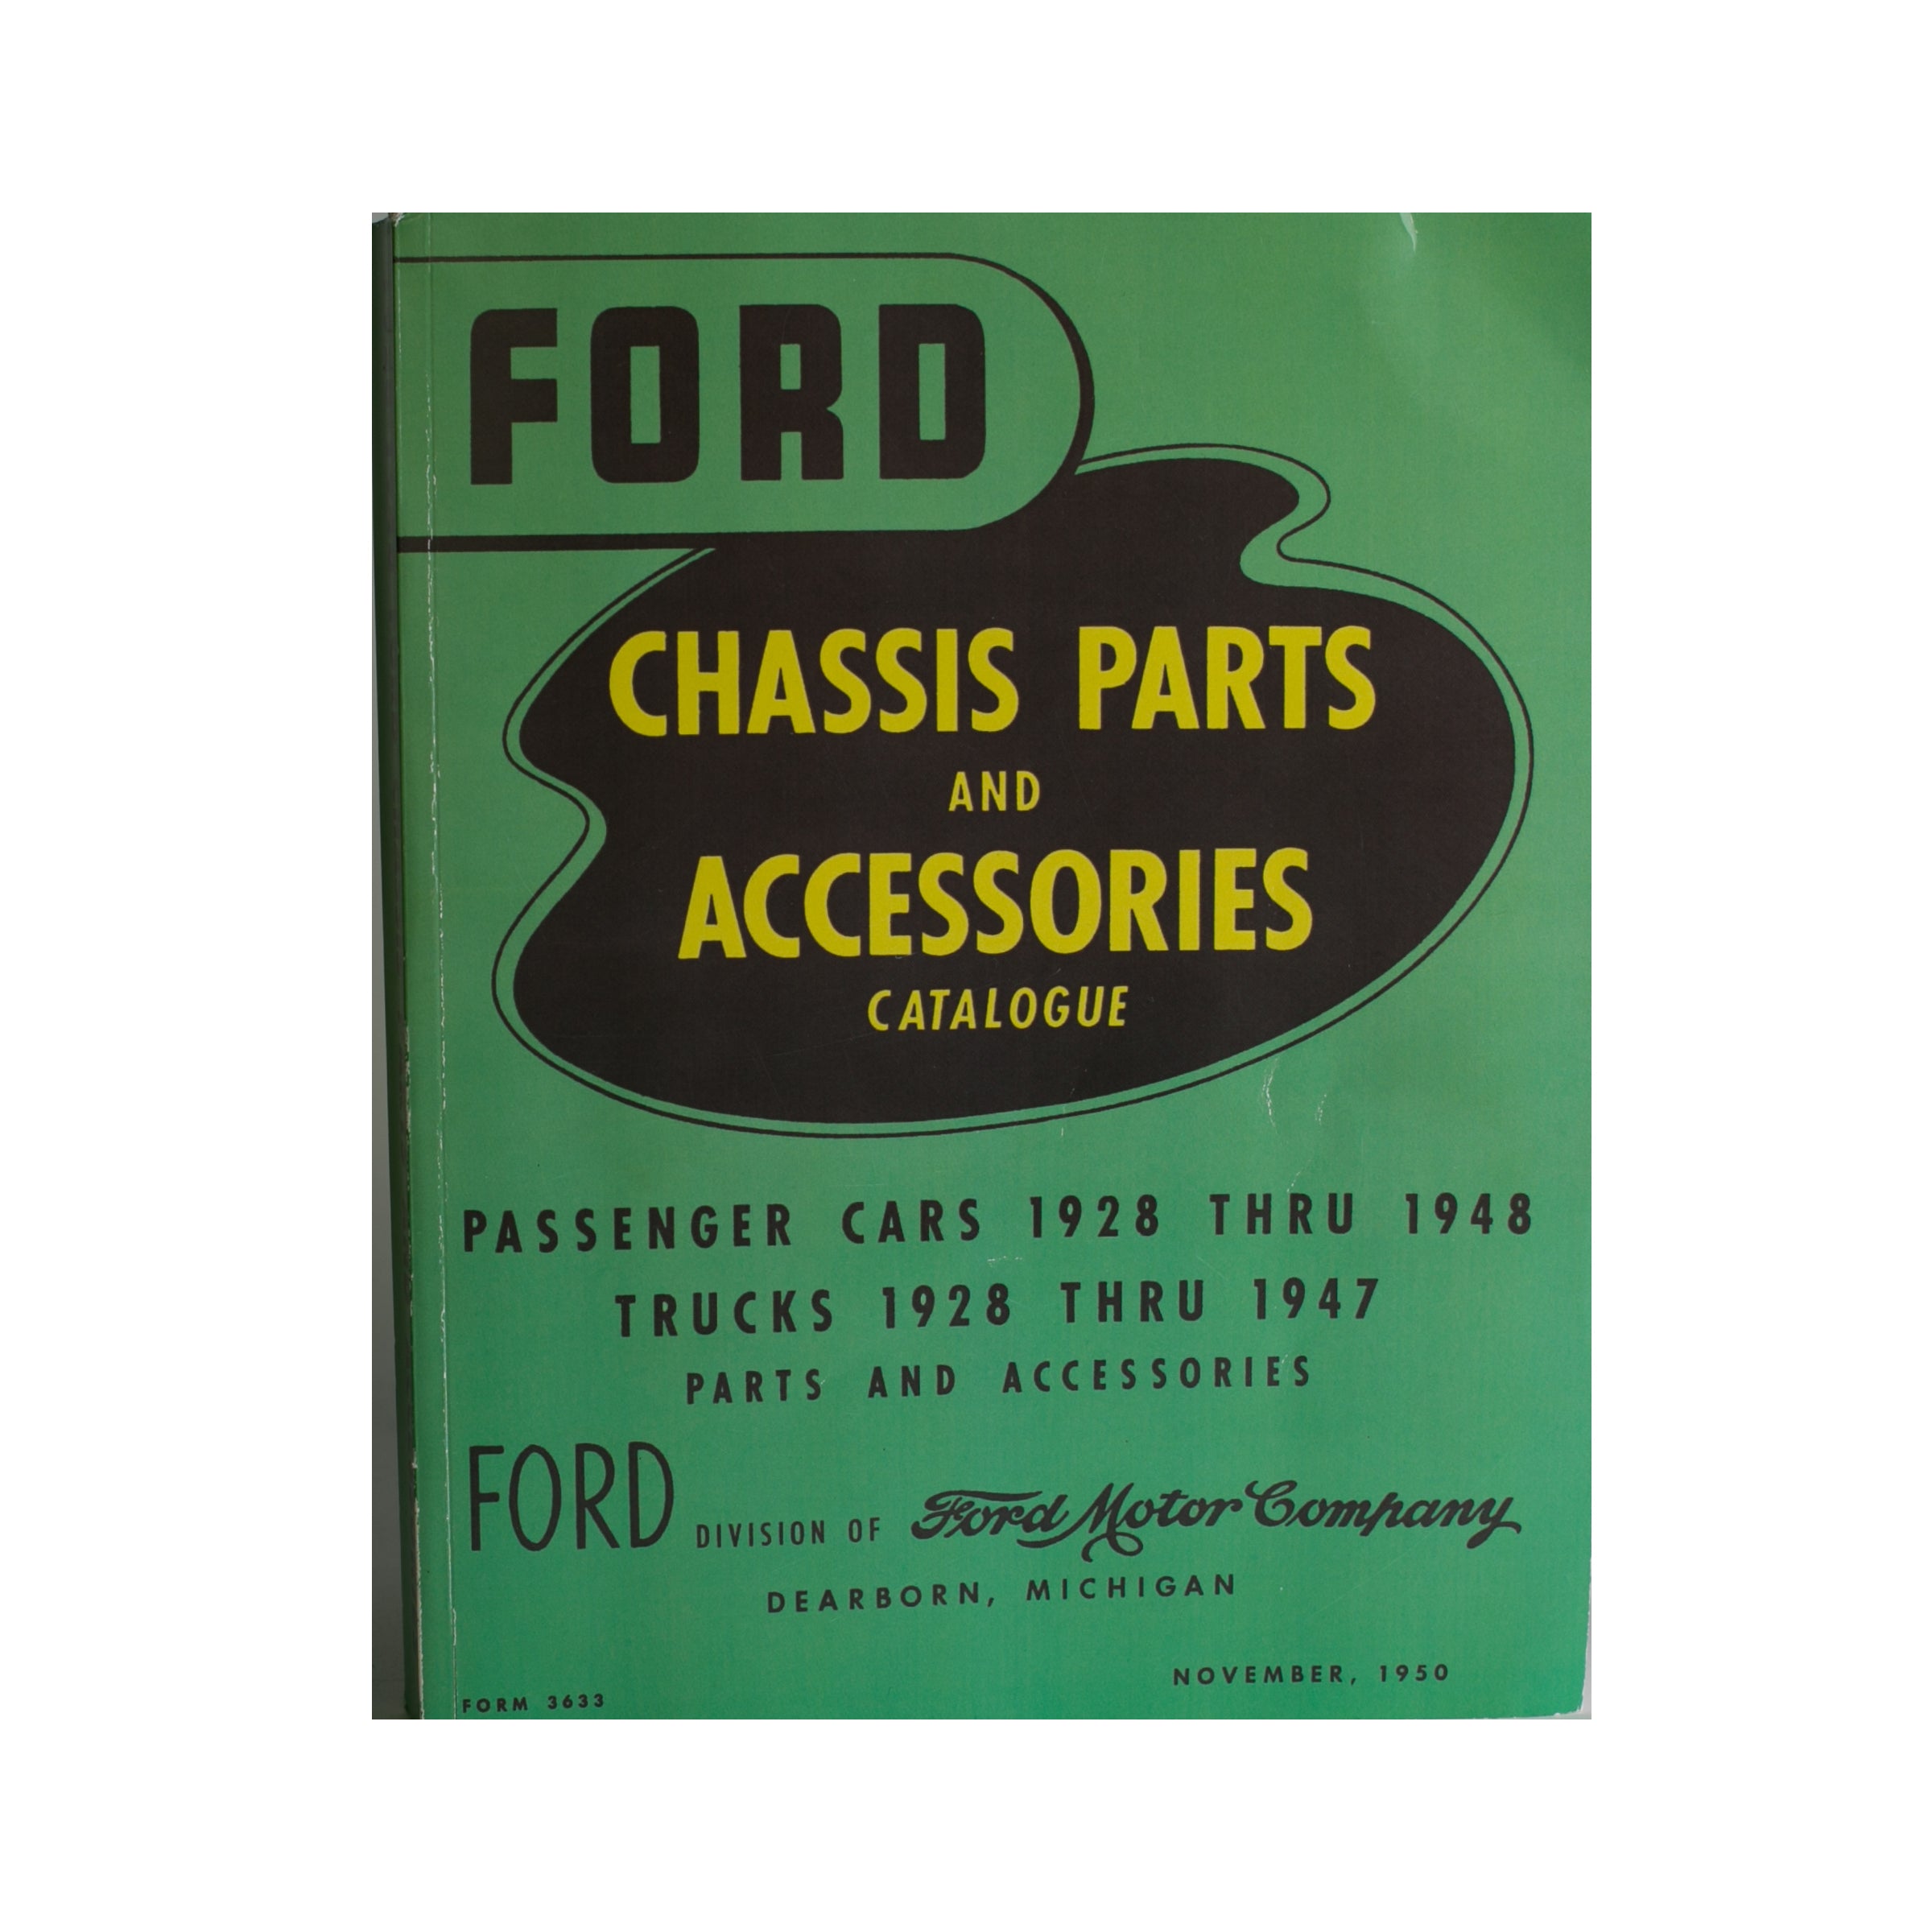 Ford Chassis Parts and Accessories • The Green Bible